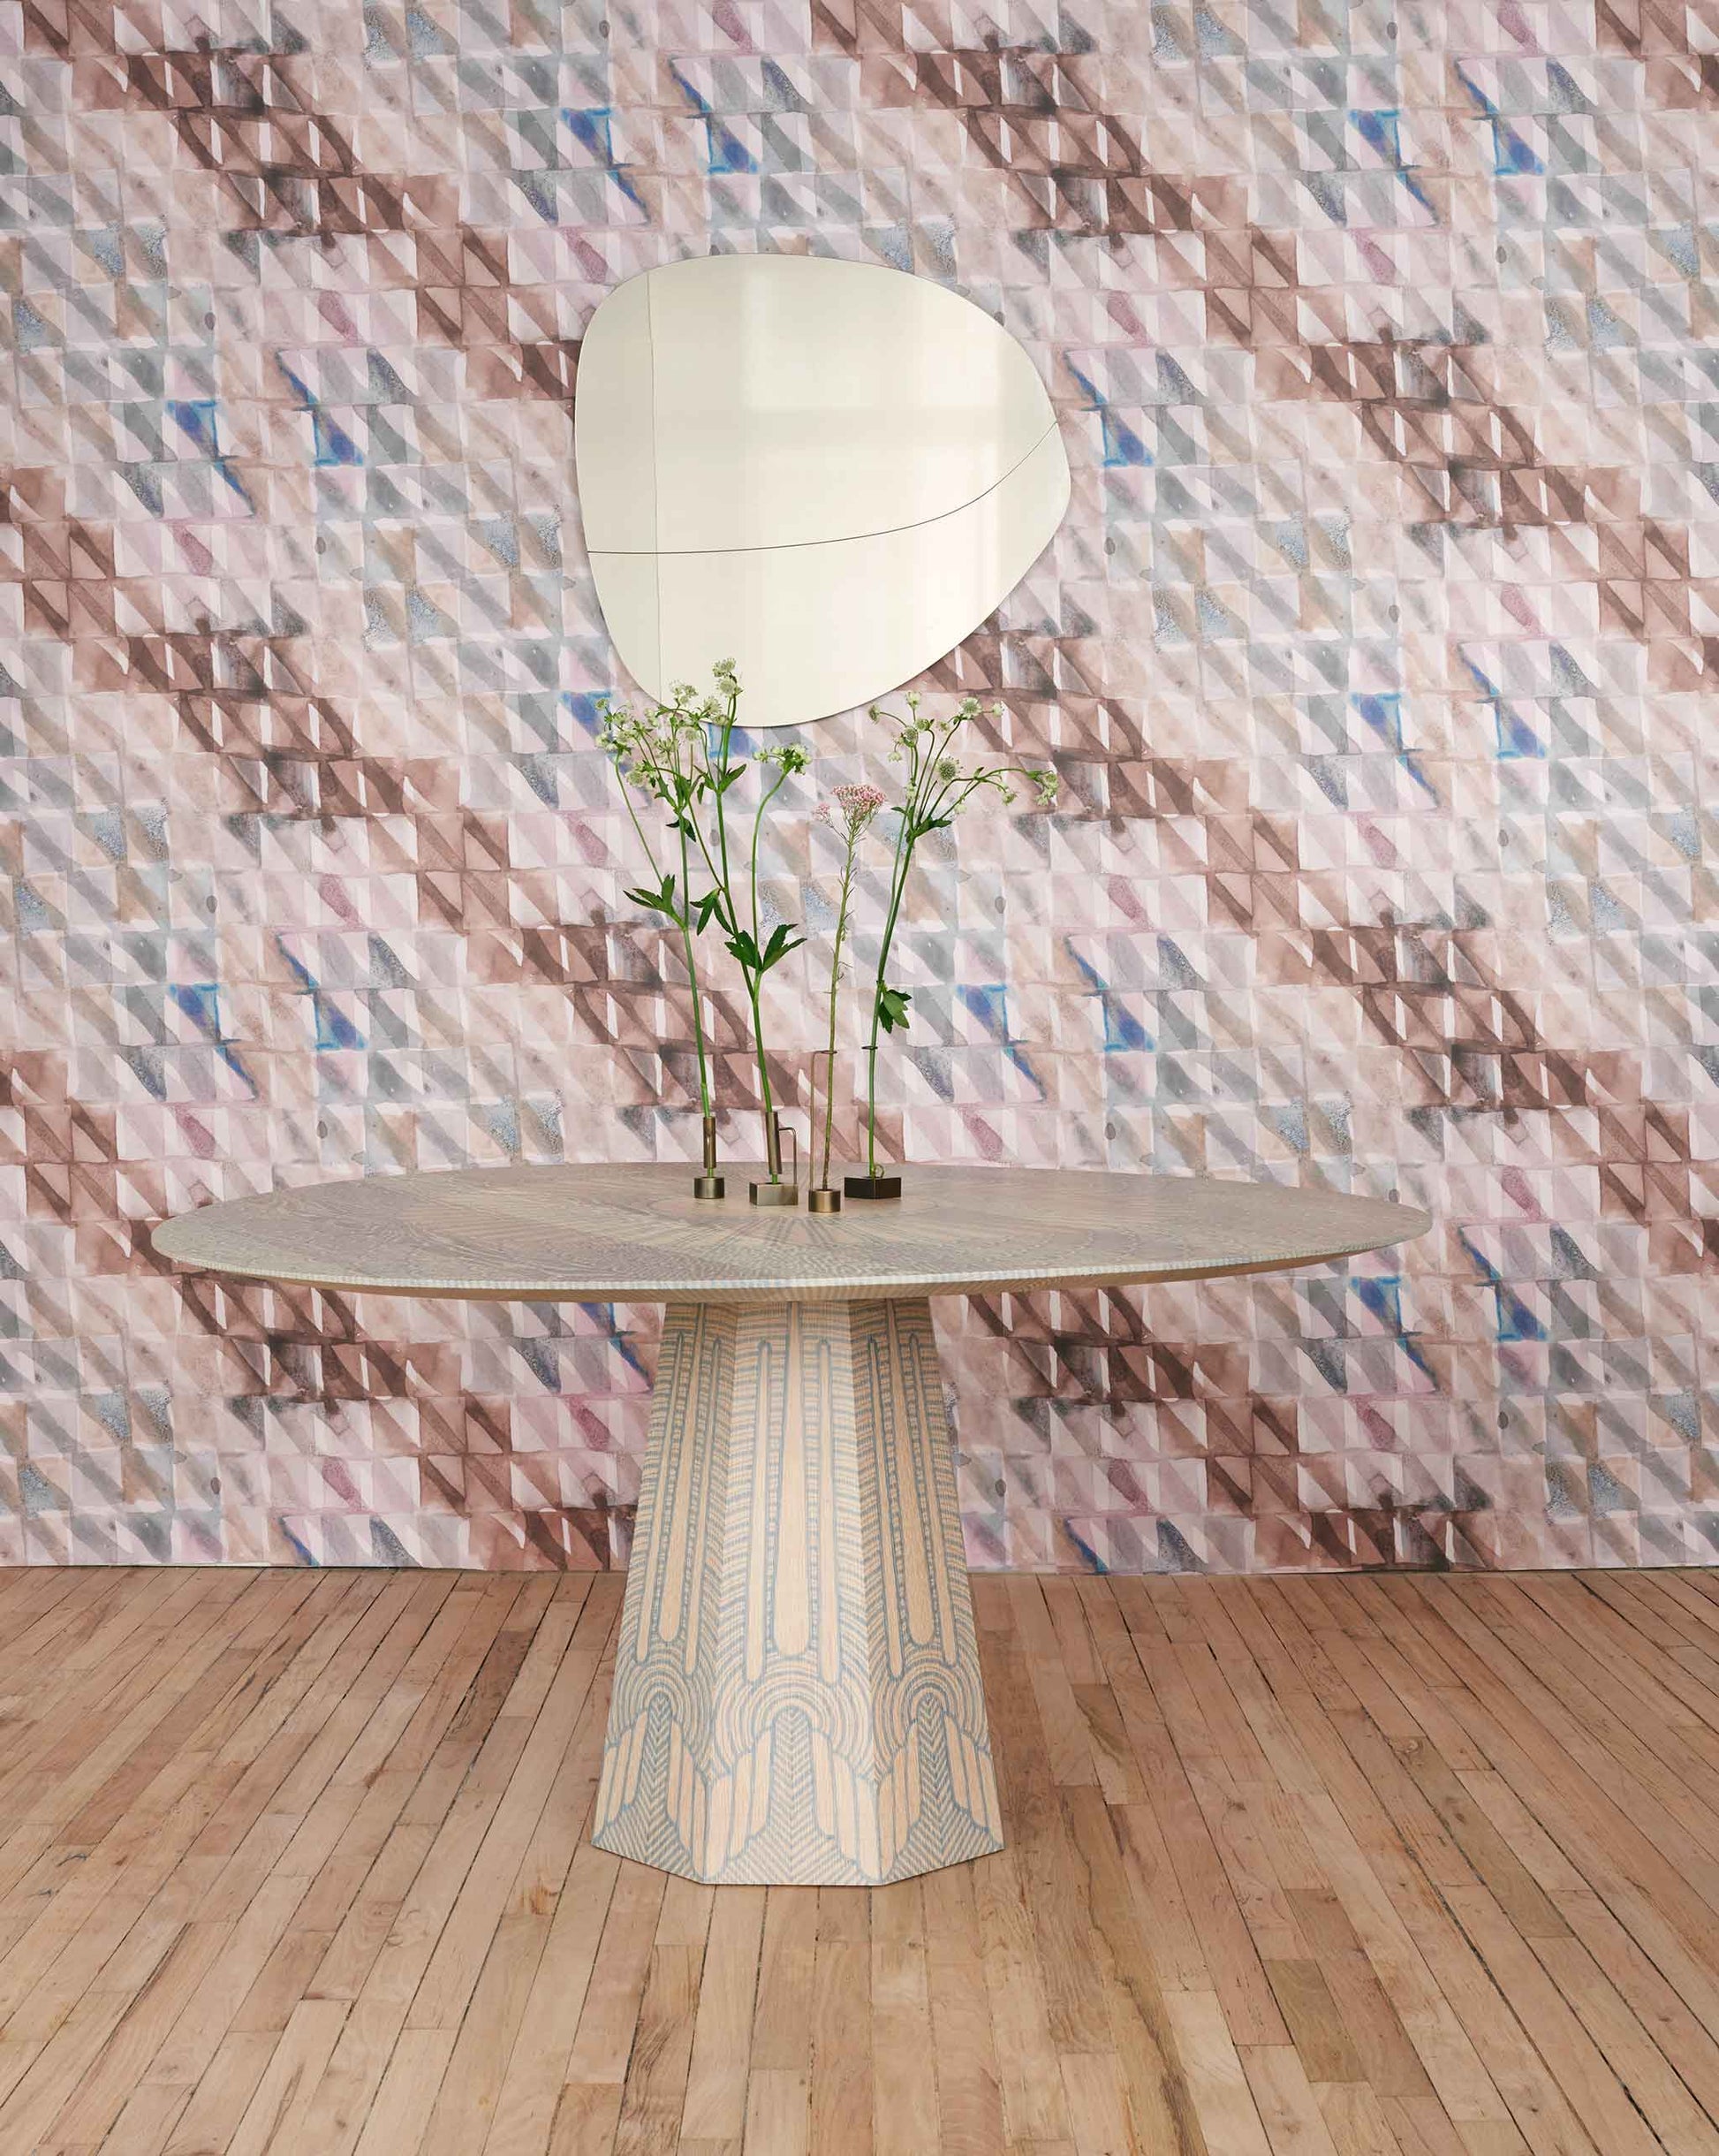 A table with a vase on it in front of a tiled wall decorated with Triangle Checks Wallpaper||Camel.